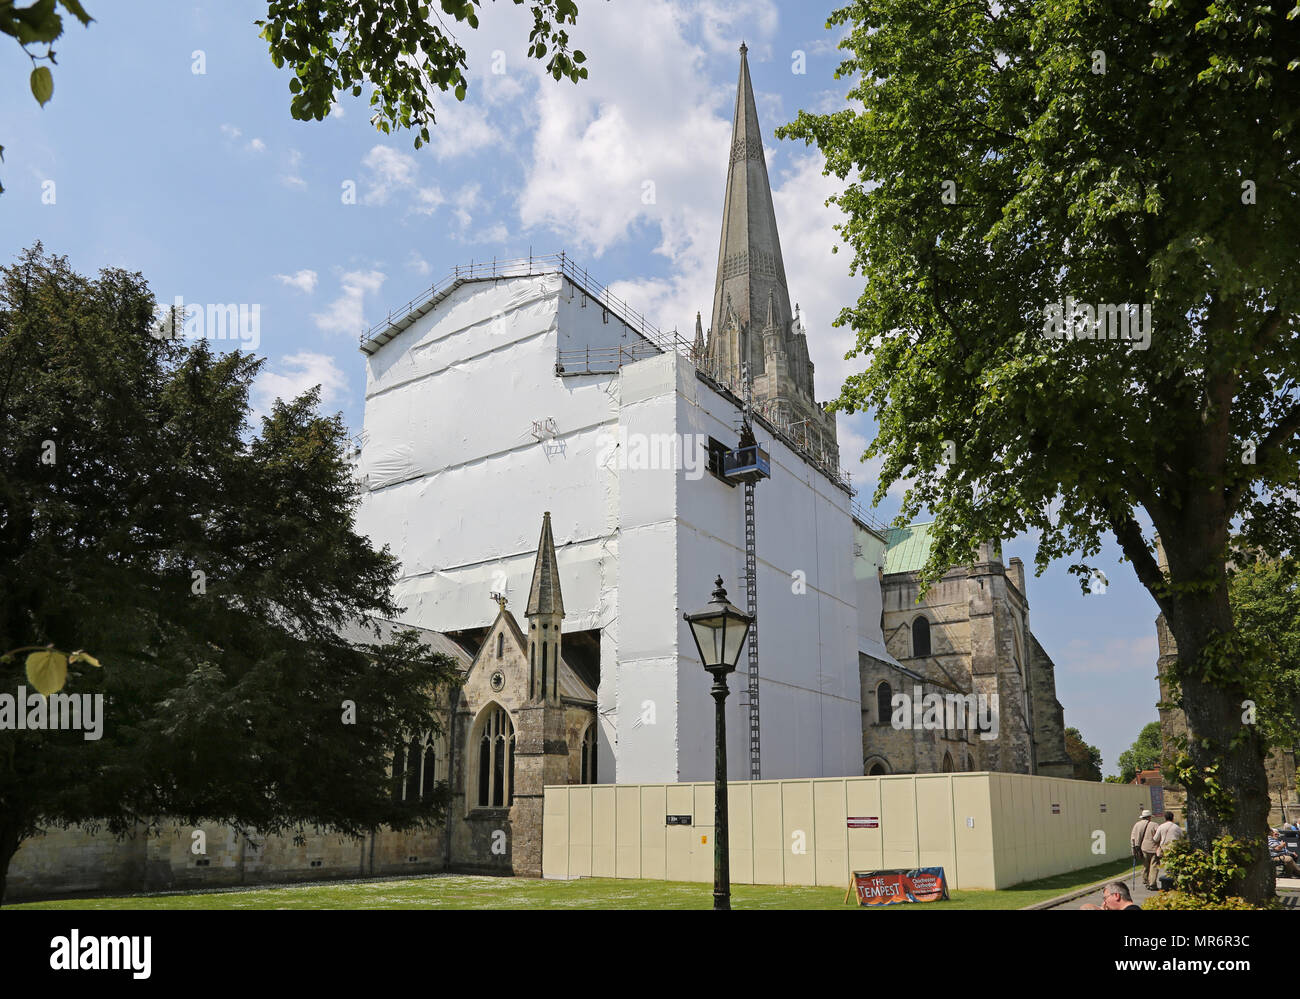 Scaffolding surrounds the chancel at Chichester Cathedral, West Sussex. The structure provides access and weather protection for major roof repairs. Stock Photo